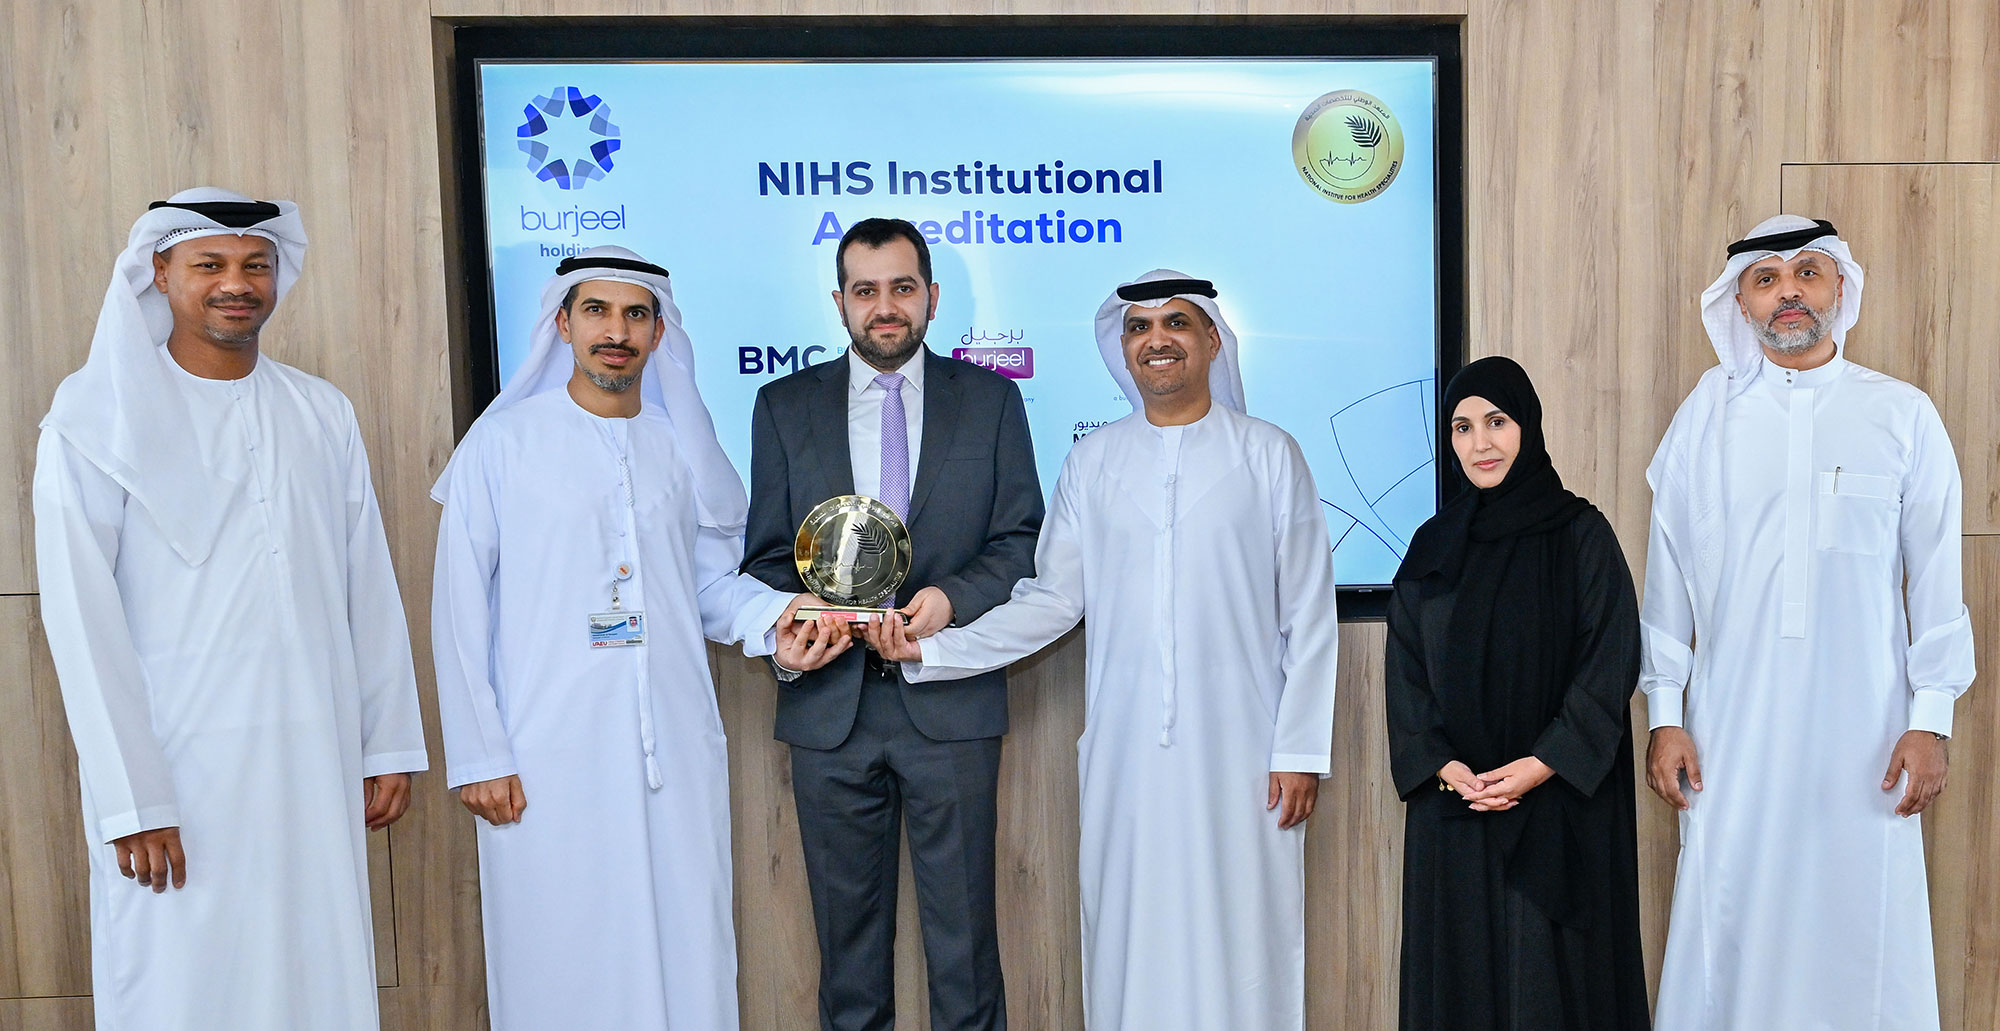 Burjeel Holdings Receives Institutional Accreditation from the National Institute for Health Specialties